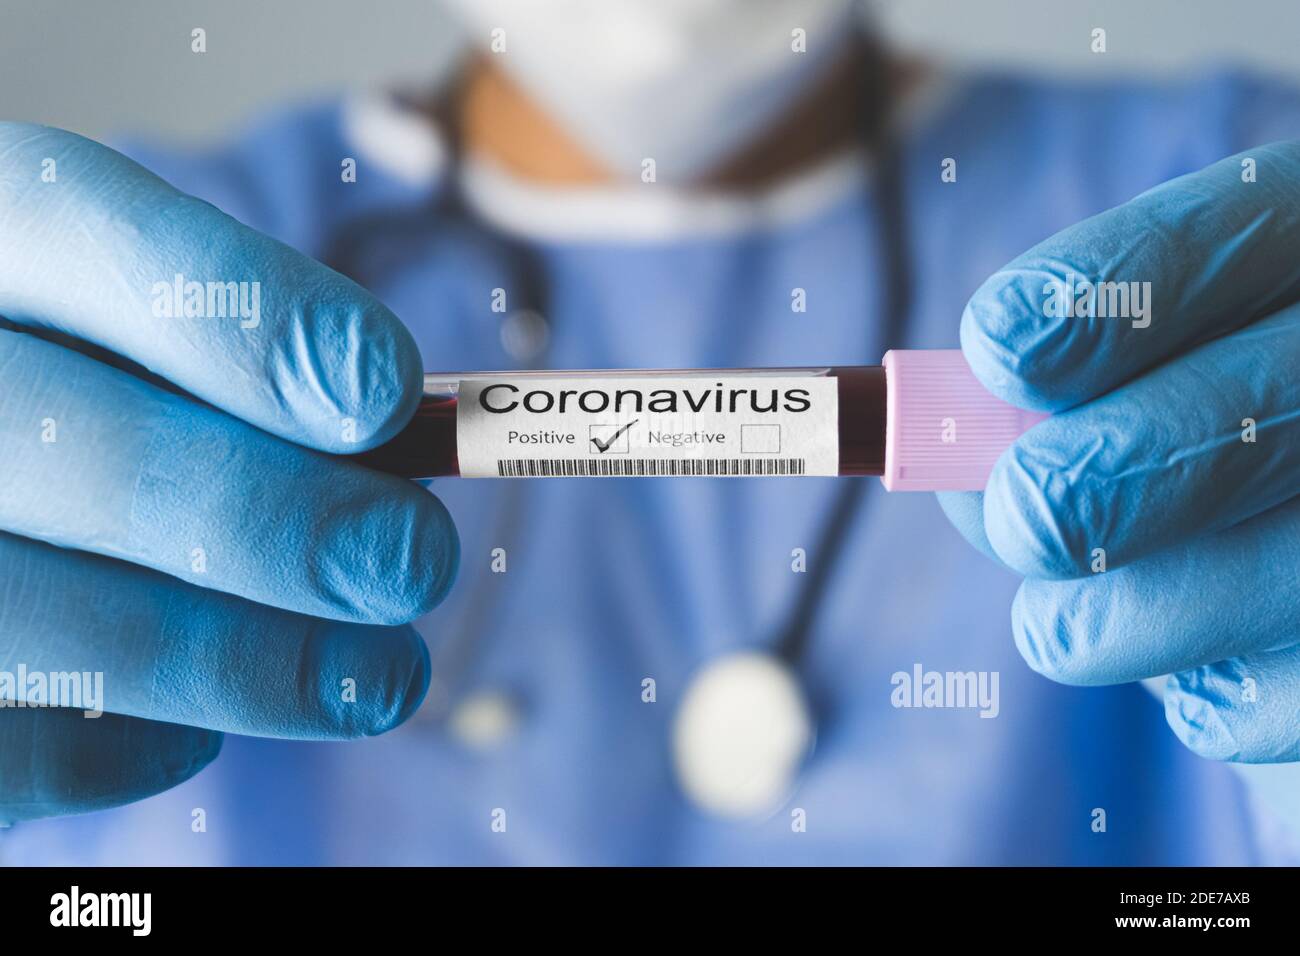 Doctor holding test tube with Positive Coronavirus test blood sample. Covid-19 concept. Stock Photo